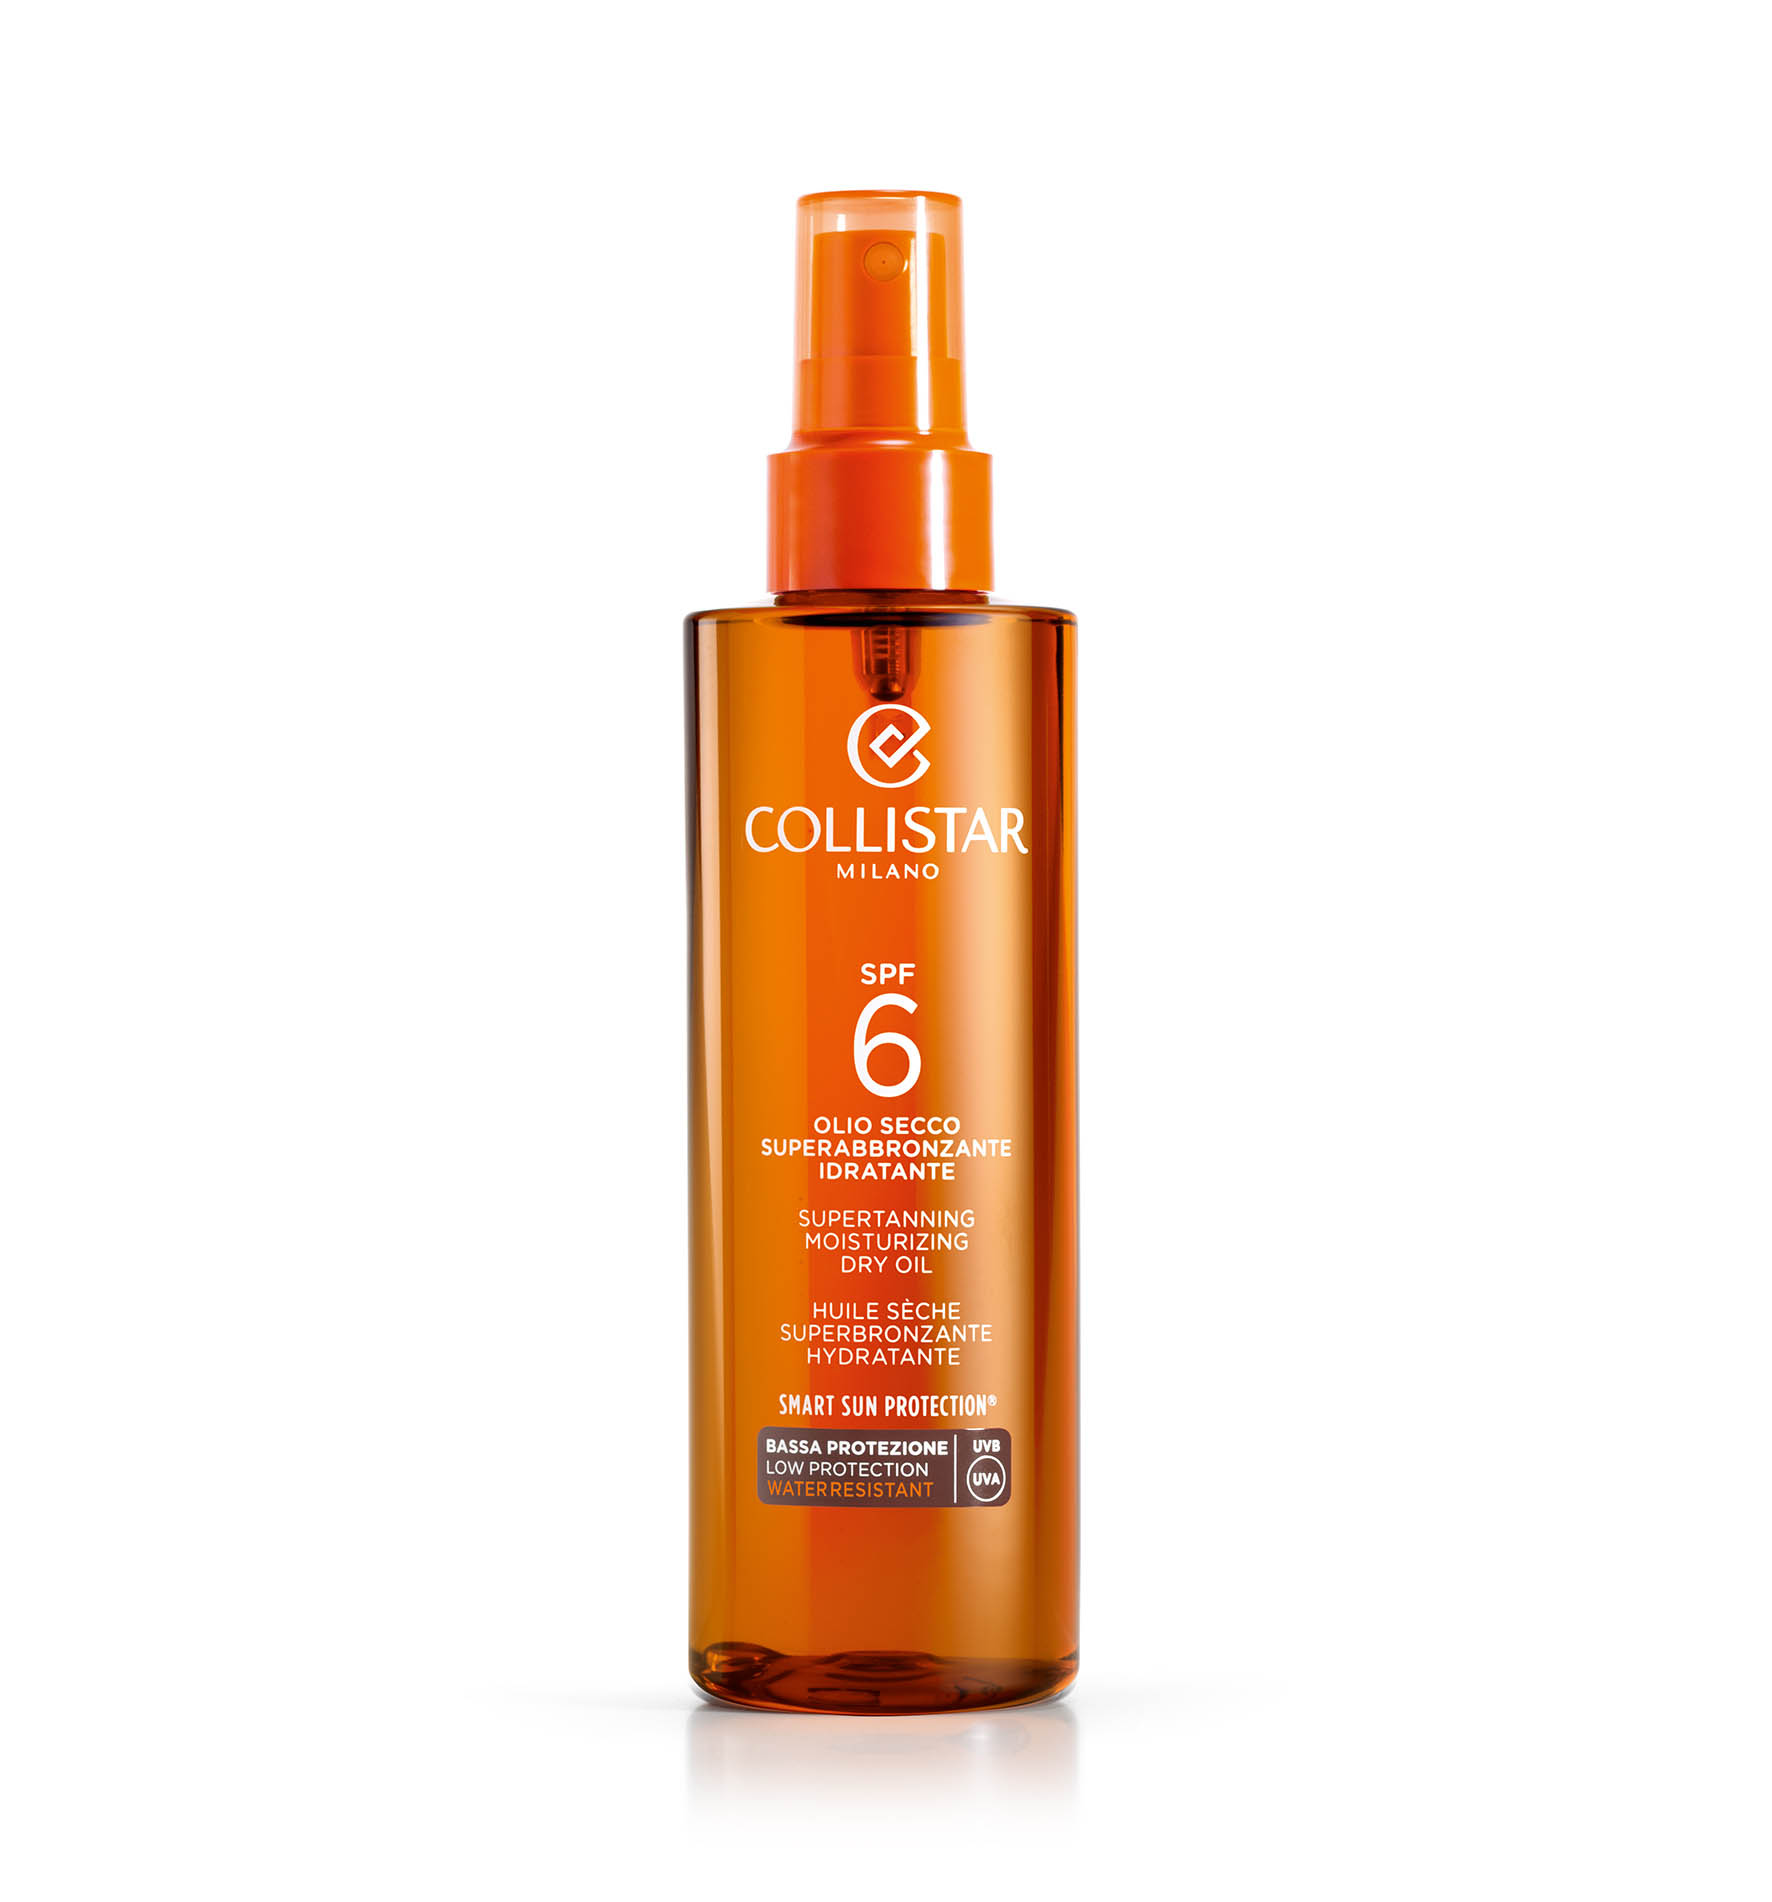 SUPERTANNING MOISTURIZING DRY OIL SPF 6 - Low Protection SPF 6-10 | Collistar - Shop Online Ufficiale